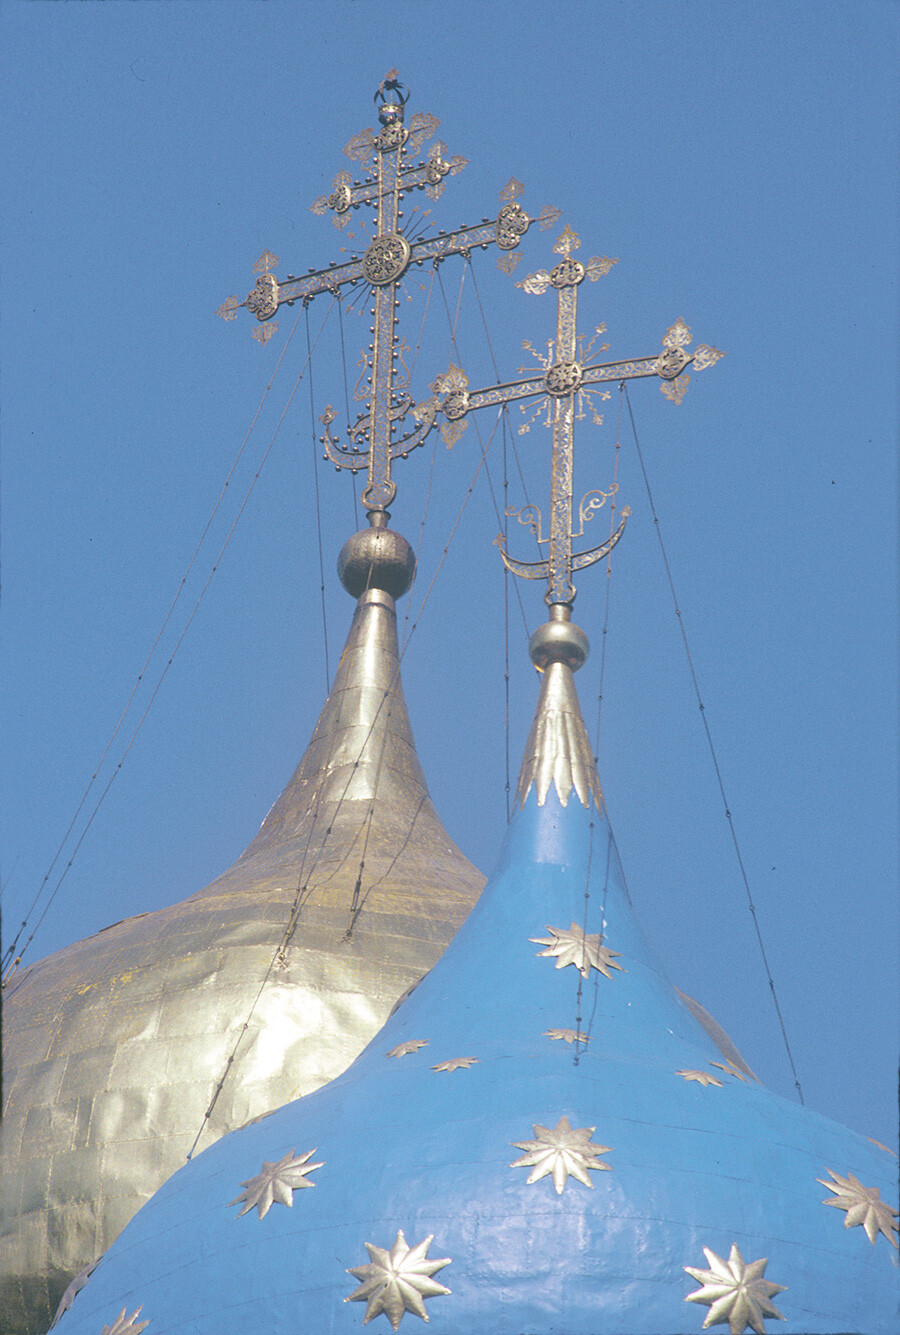 Trinity-St. Sergius Monastery. Dormition Cathedral, cupolas & crosses, southwest view. June 3, 1992